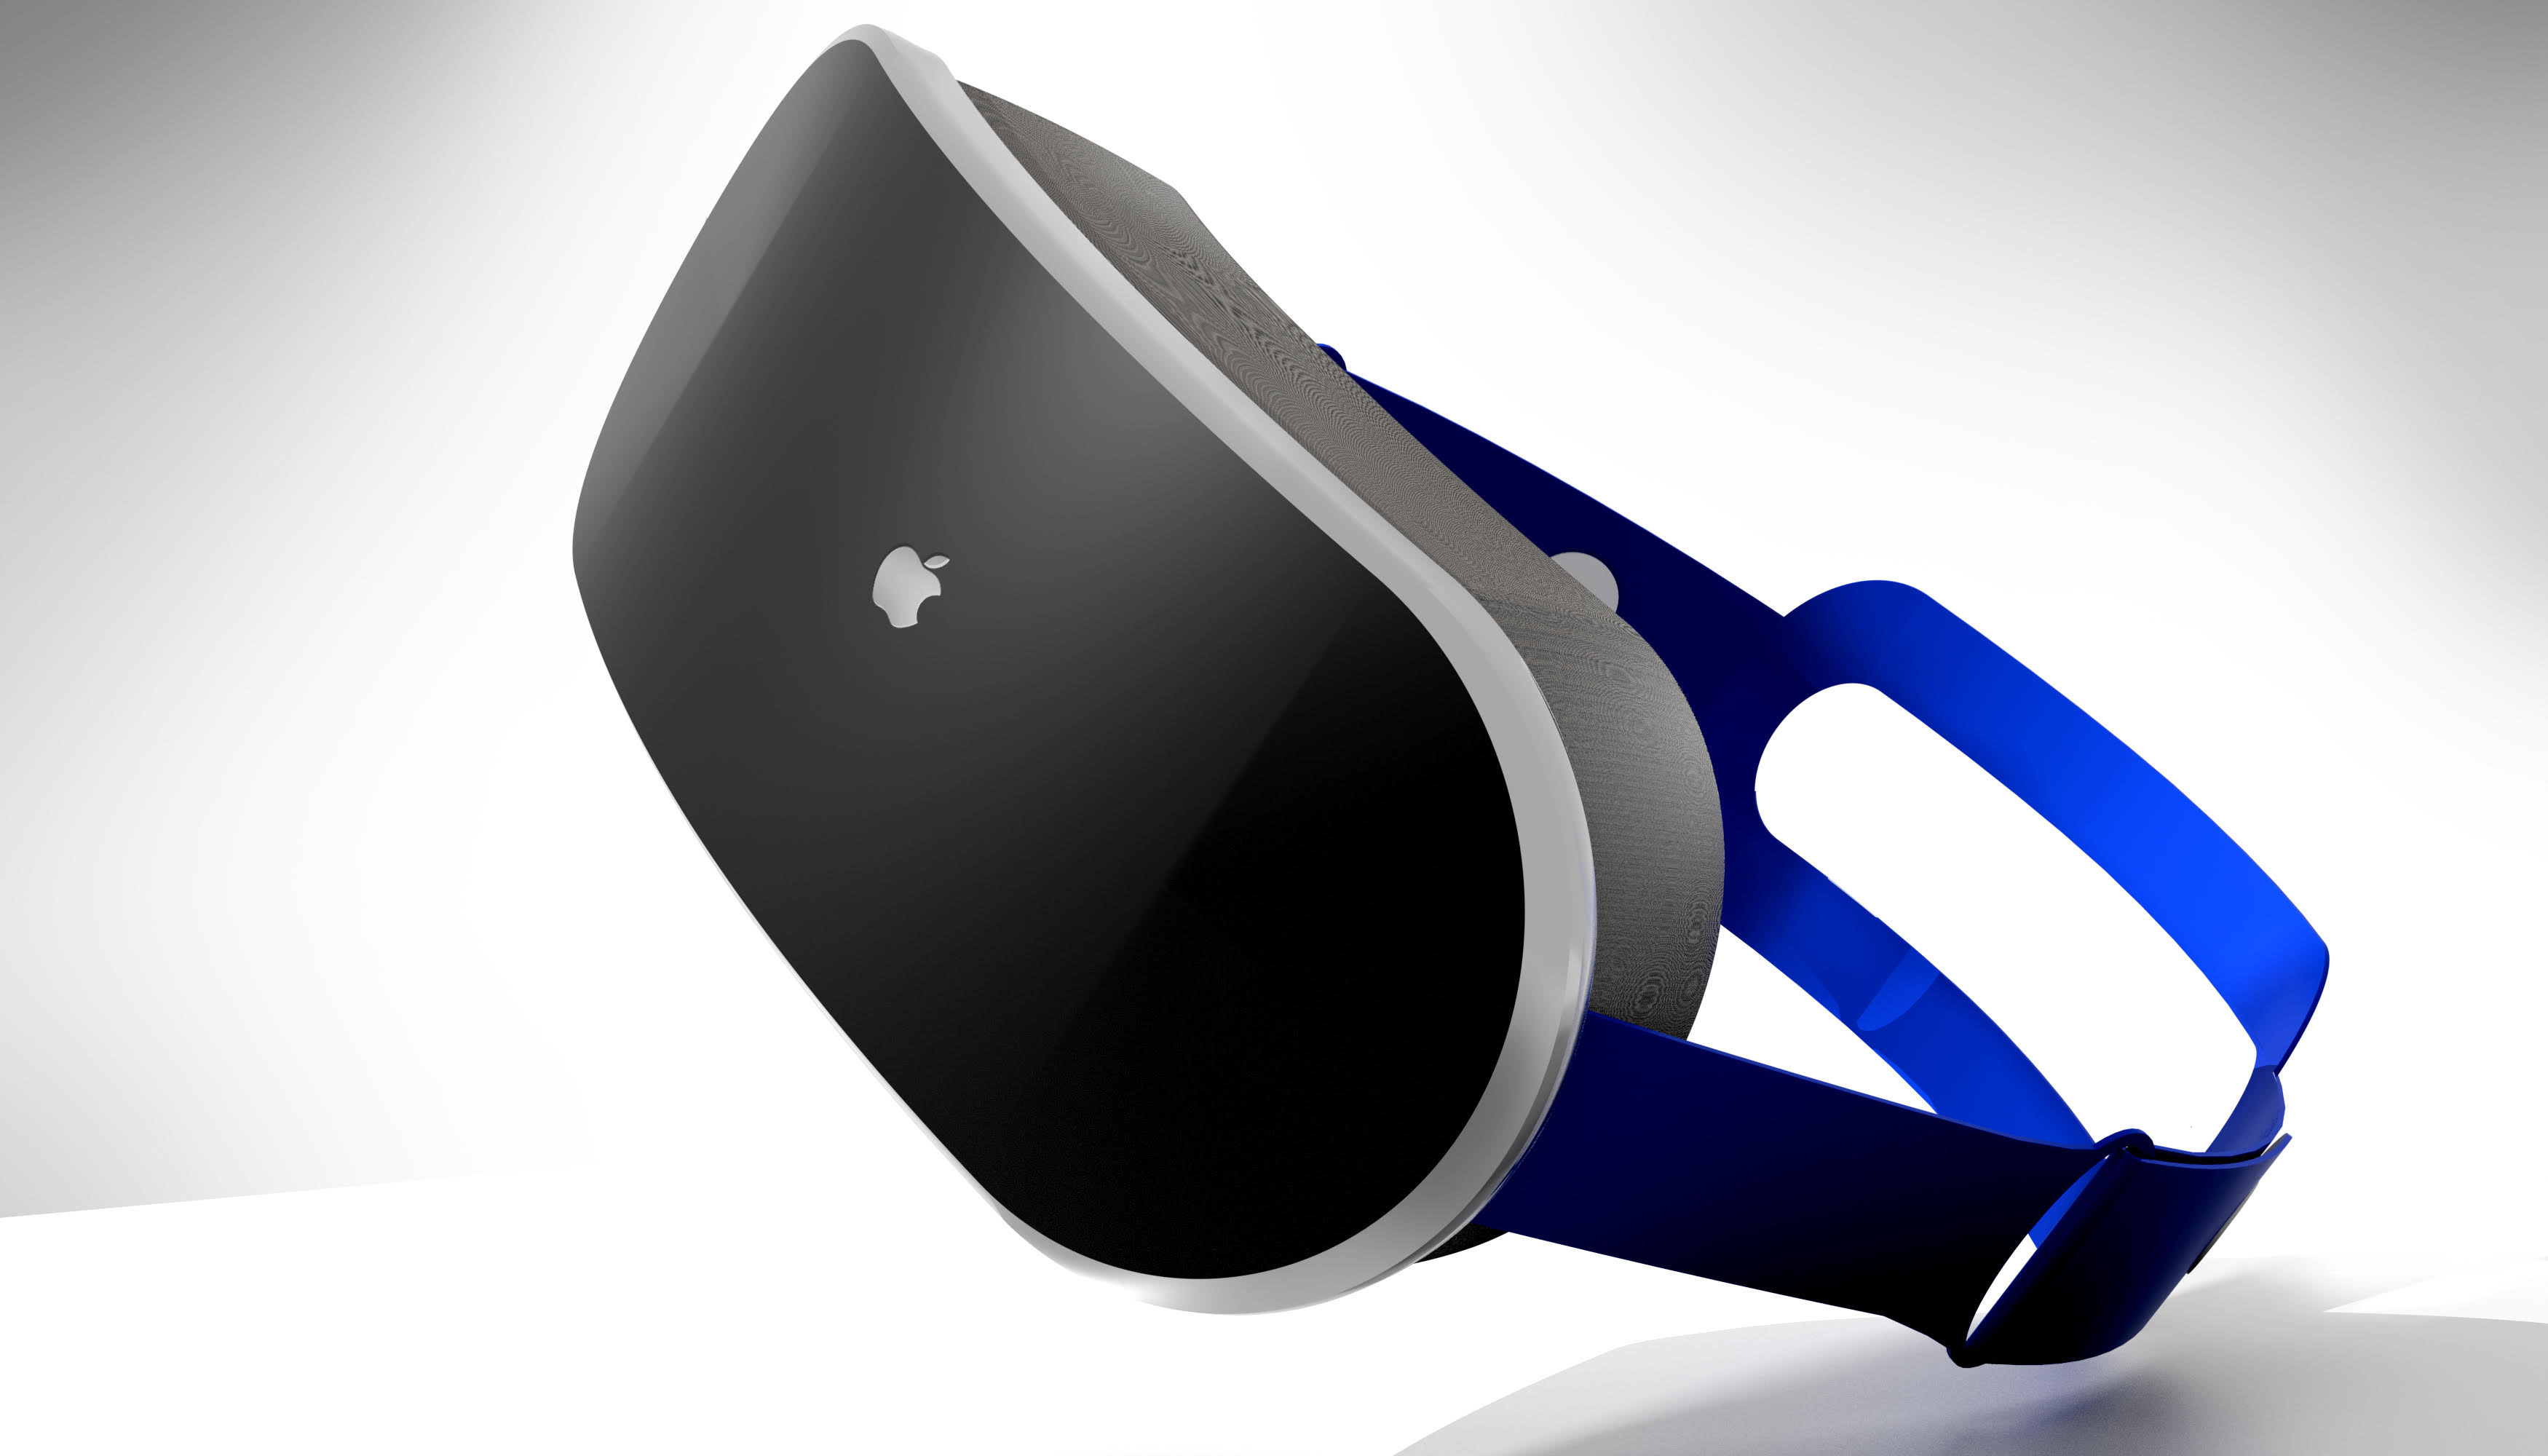 Apple Will Soon Release Their Own VR/AR Headset